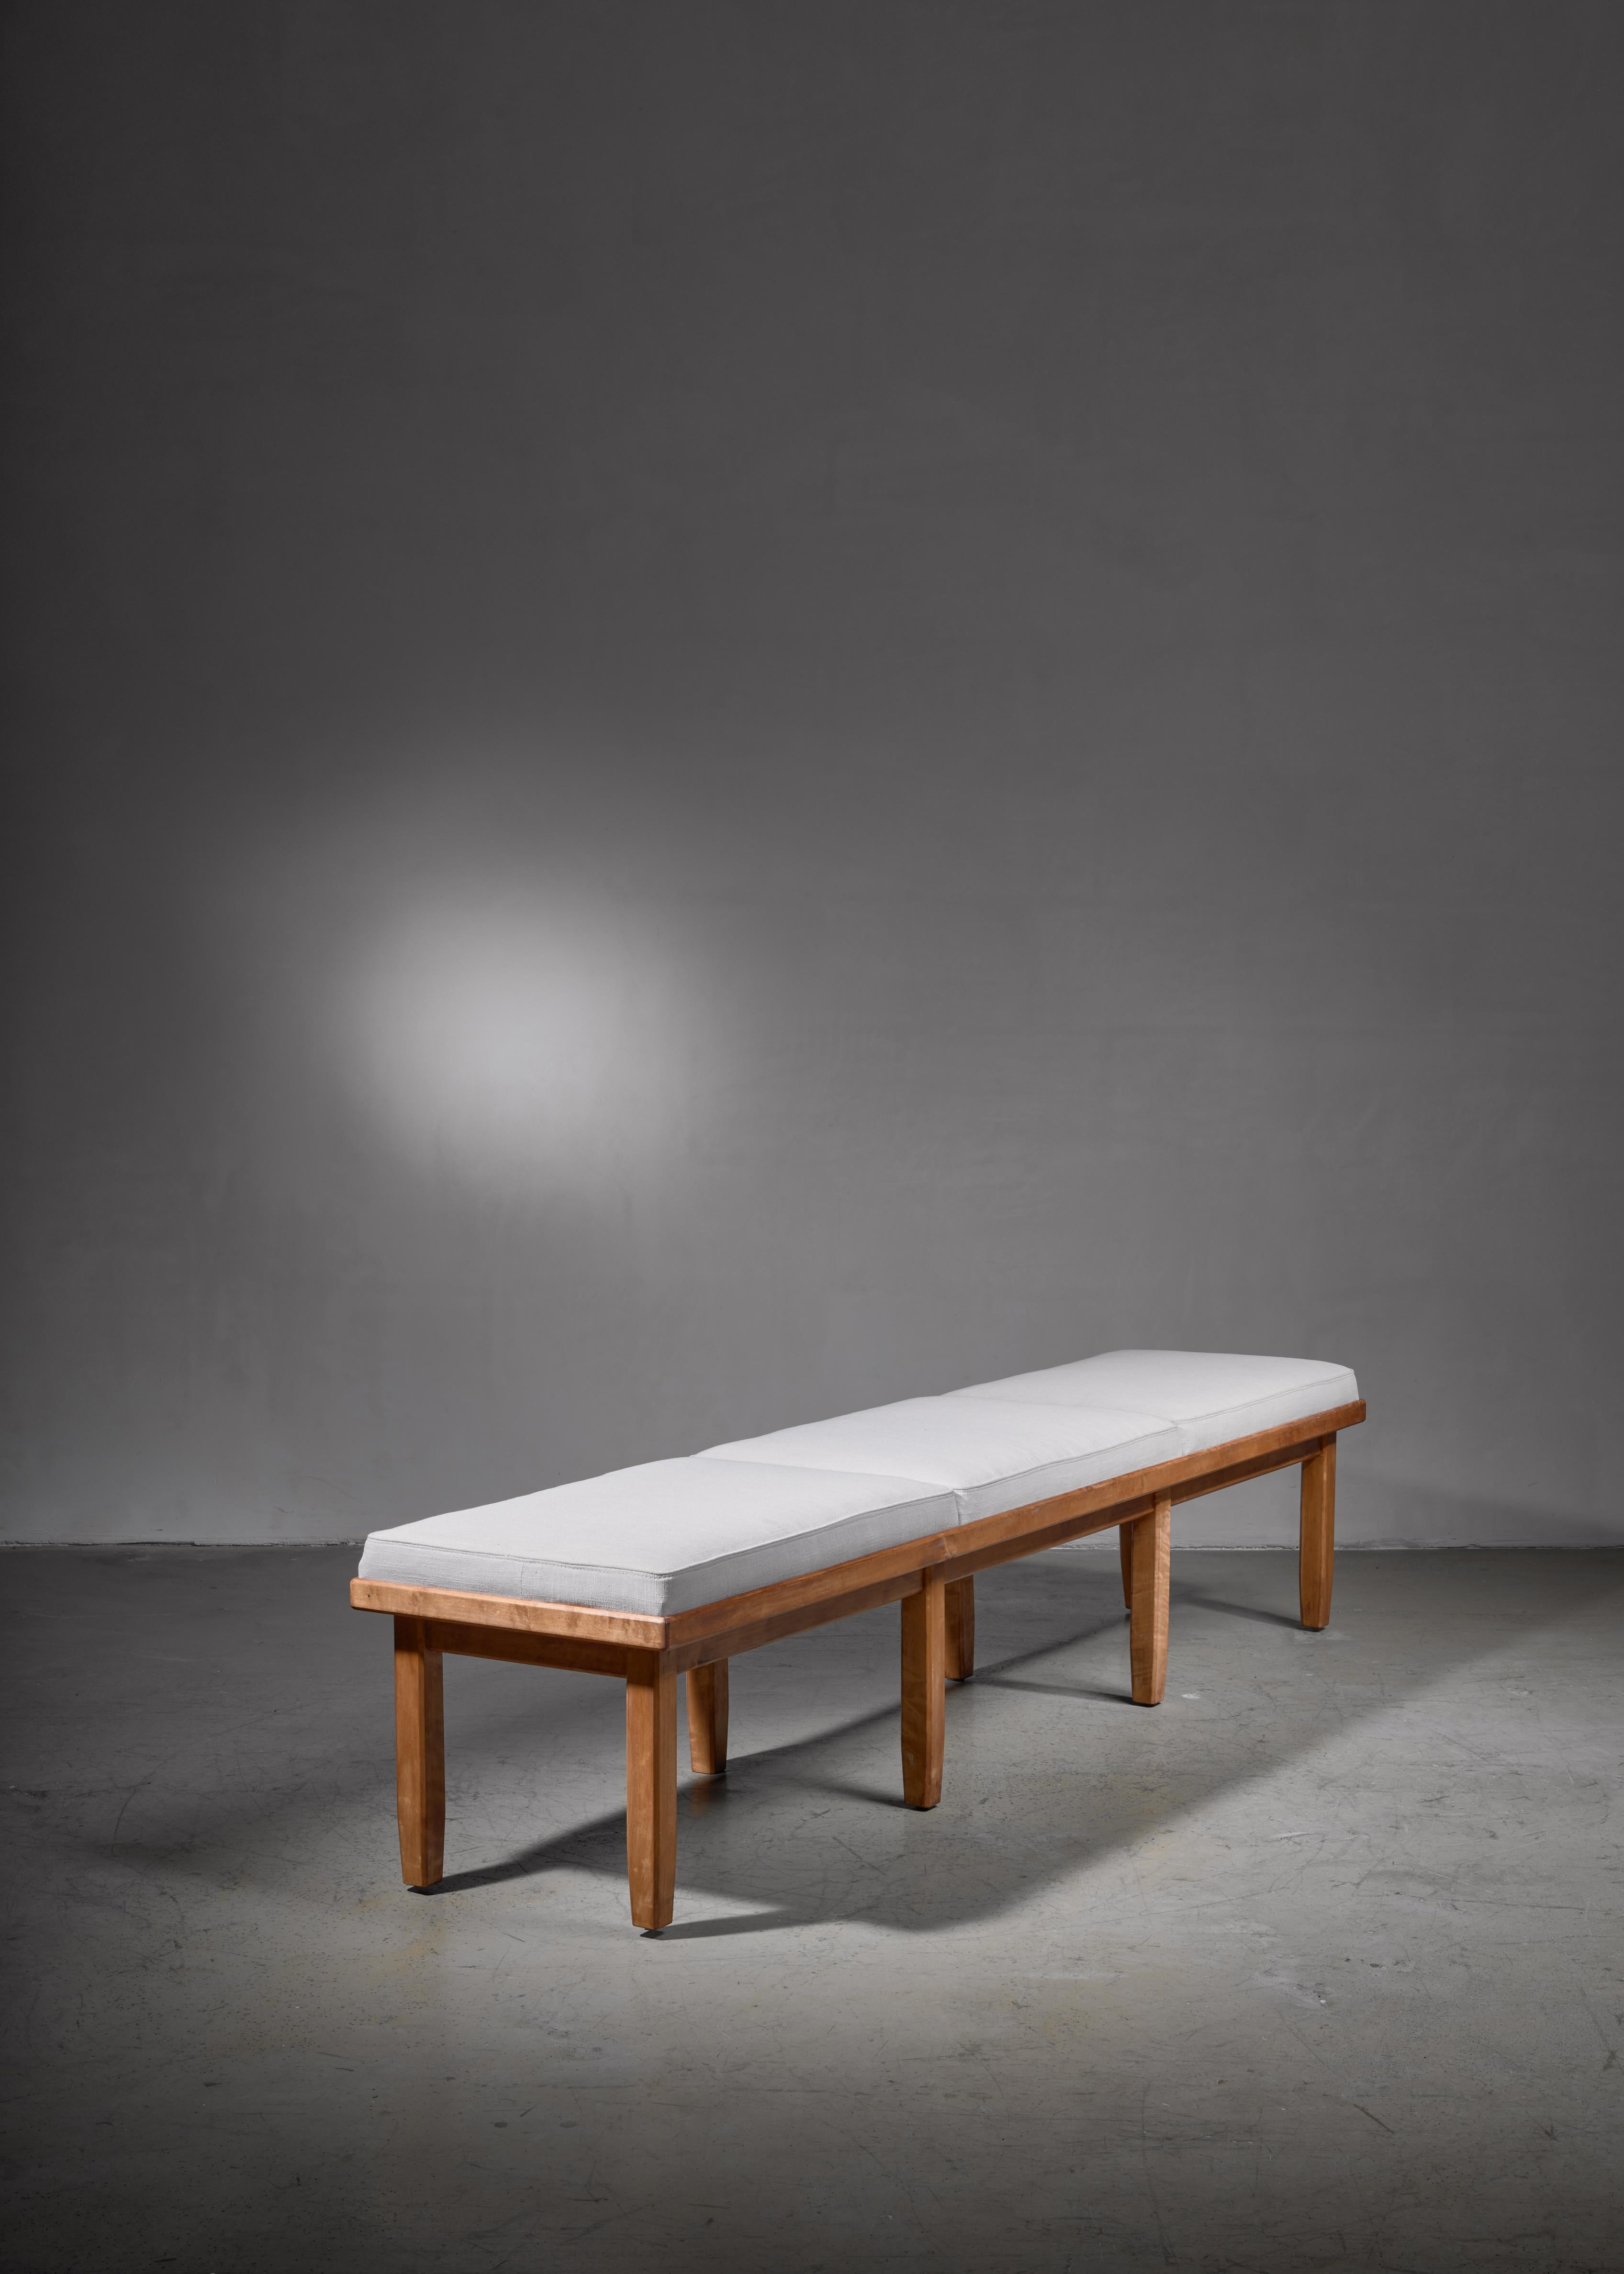 A long bench in tiger or curly maple with three cushions, by Nordiska Kompaniet, Sweden. The cushions have been reupholstered with an off-white fabric in our in-house atelier.
Labeled by Nordiska with the production number R566109-C39054 and in a